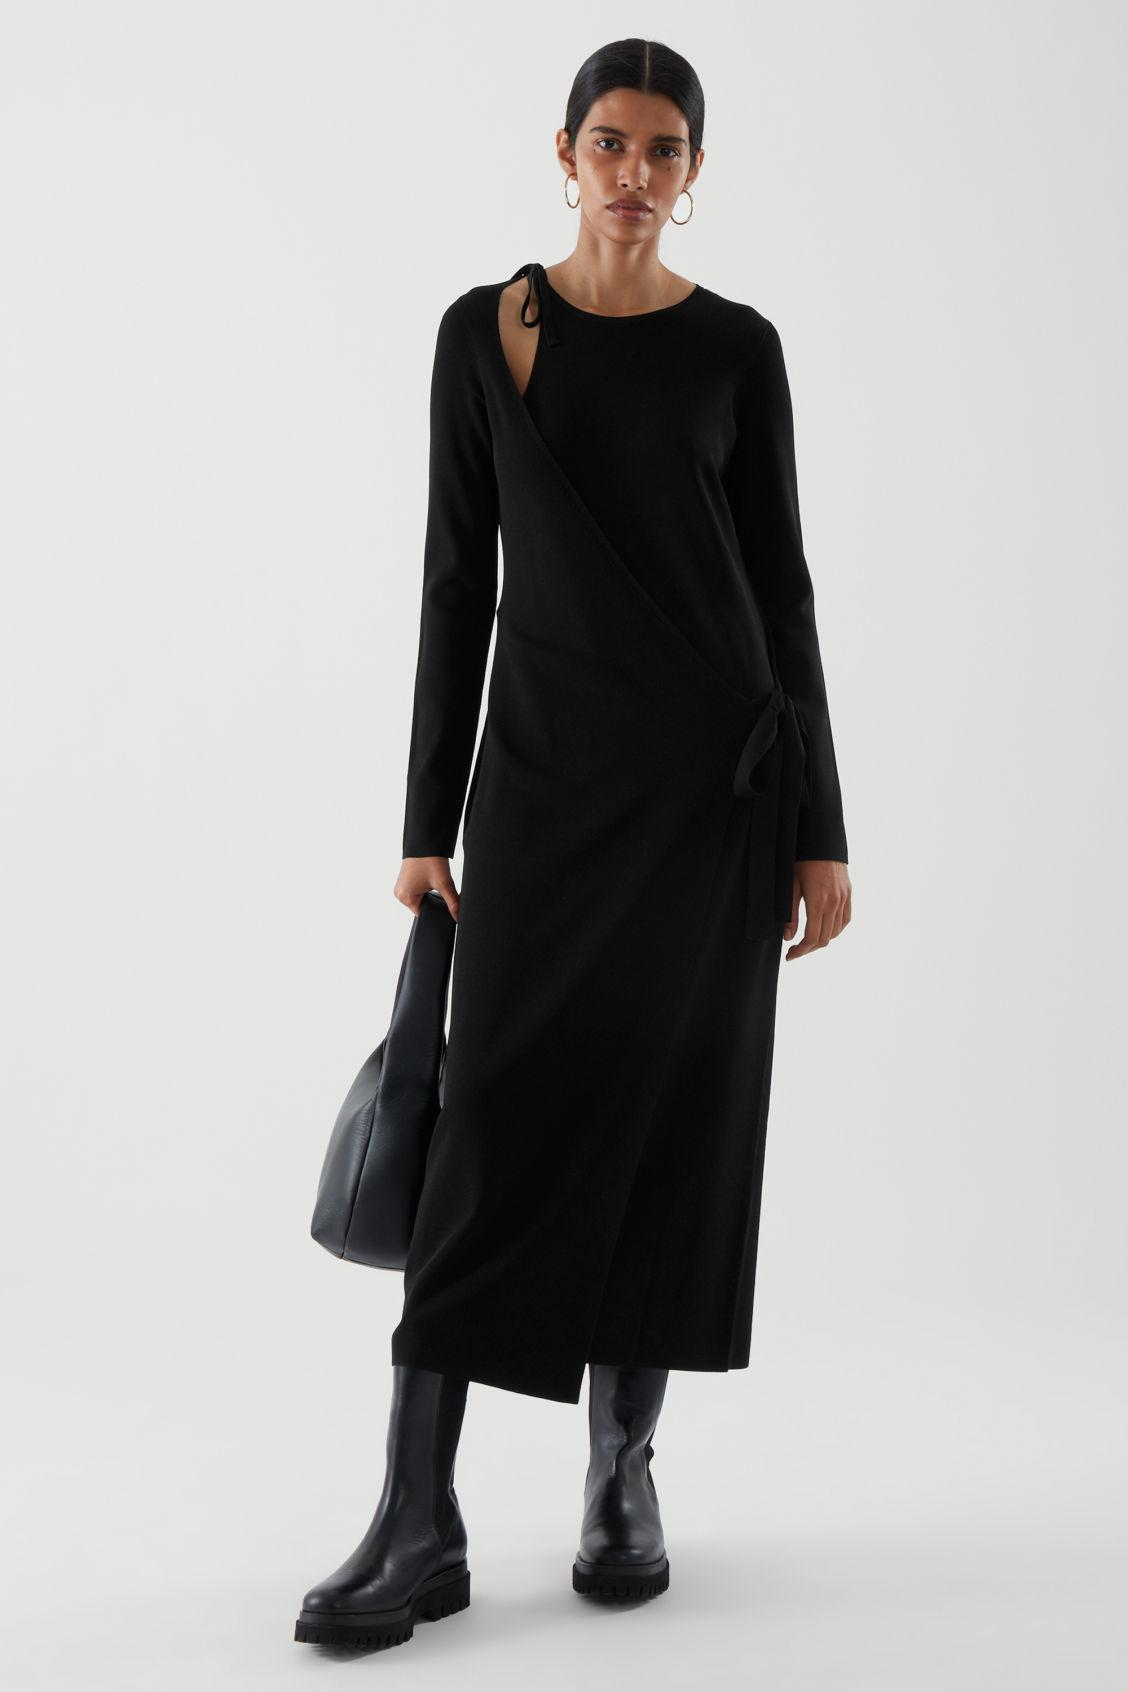 COS Synthetic Asymmetric Knitted Wrap Dress in Black | Lyst